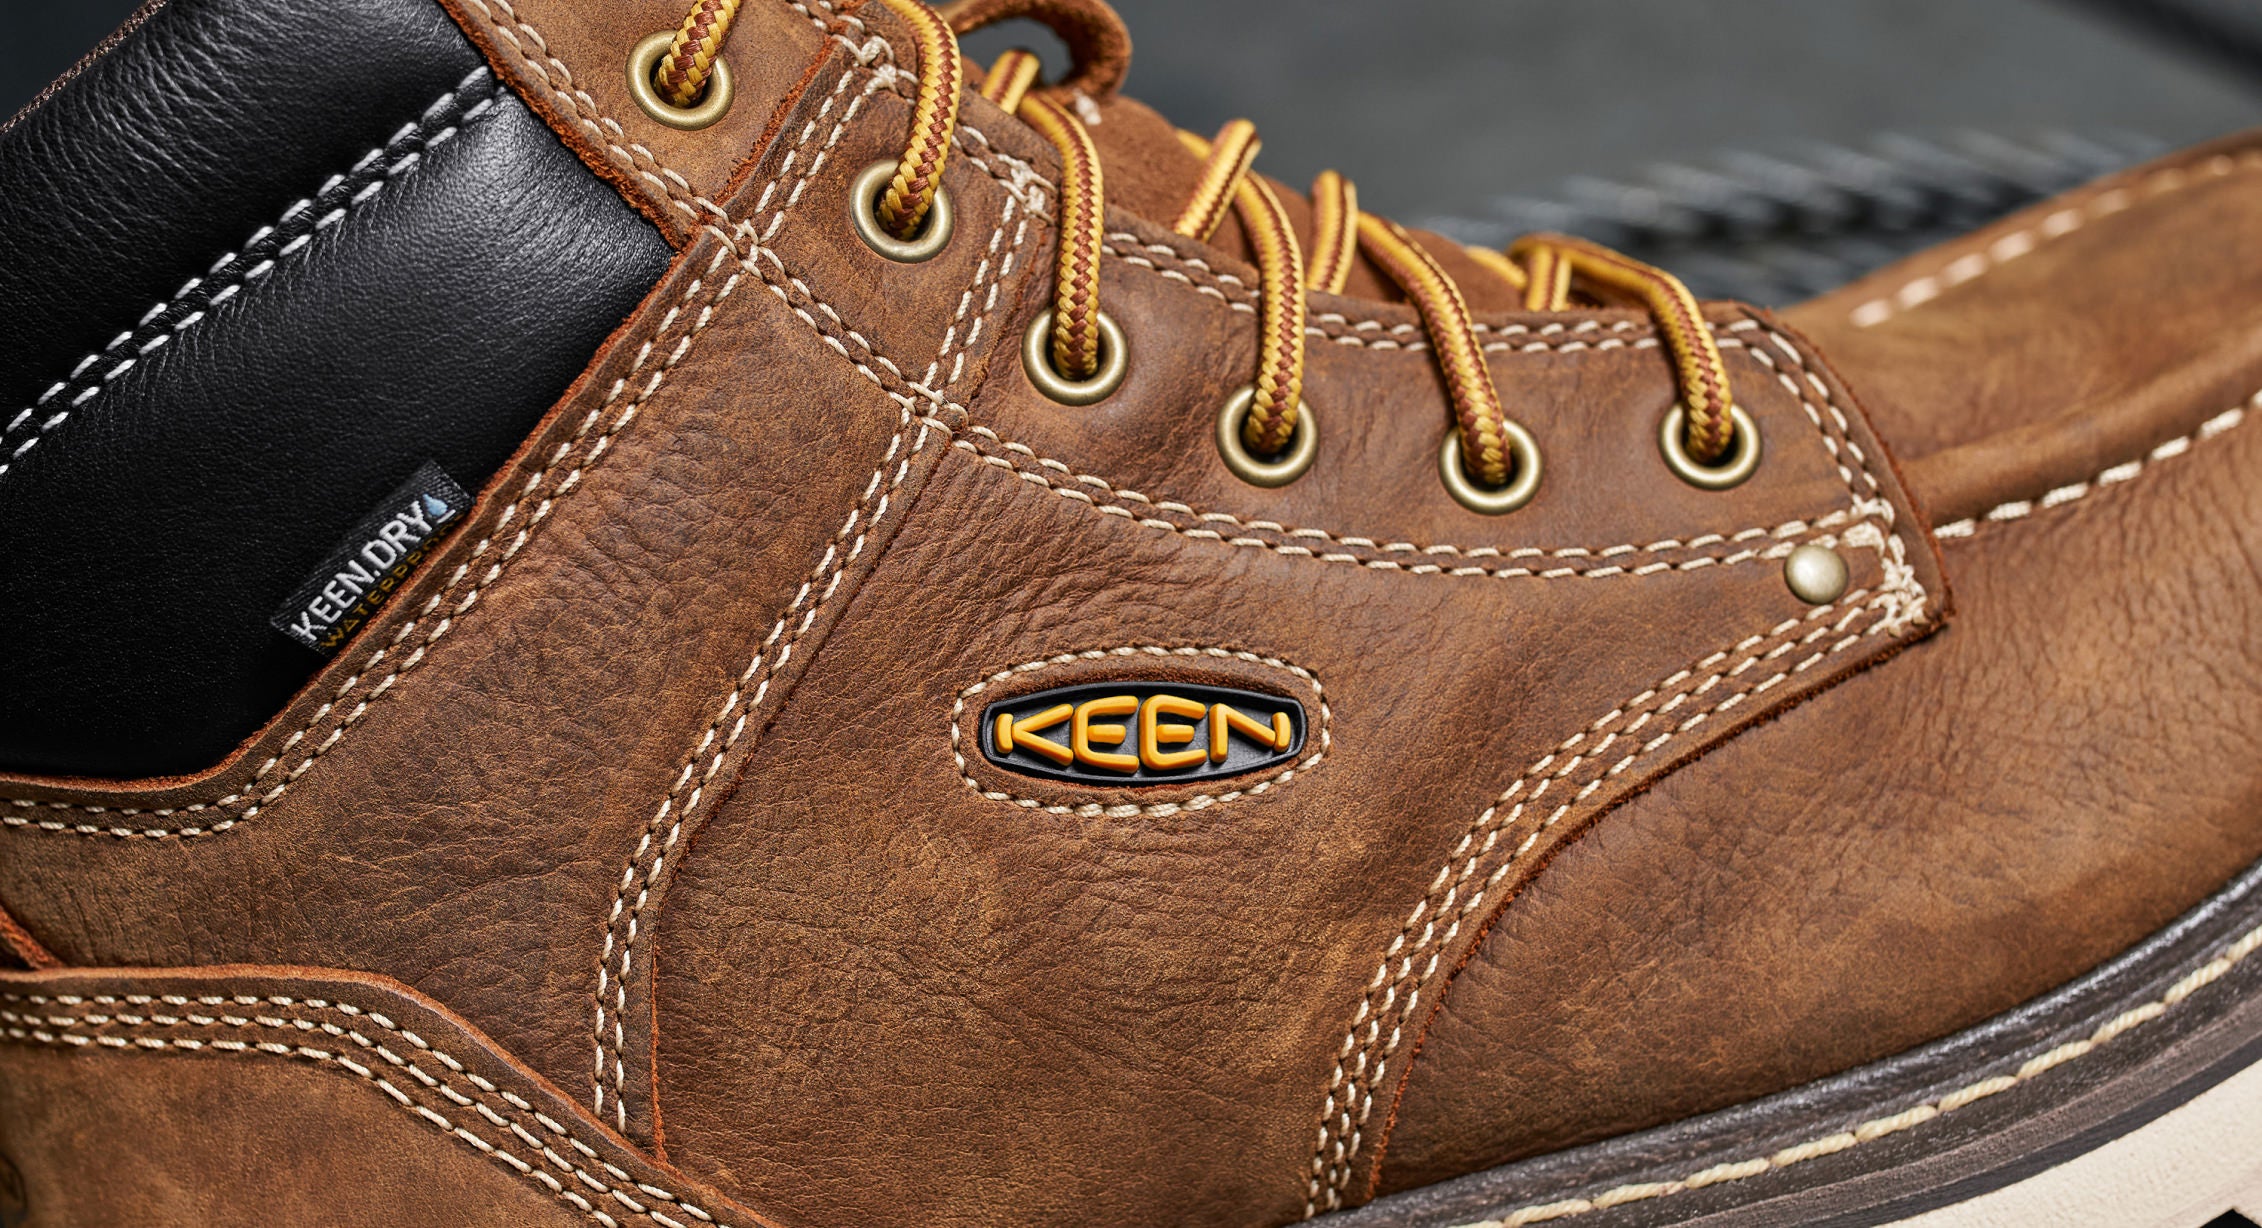 Closeup of leather upper on KEEN welted work boot